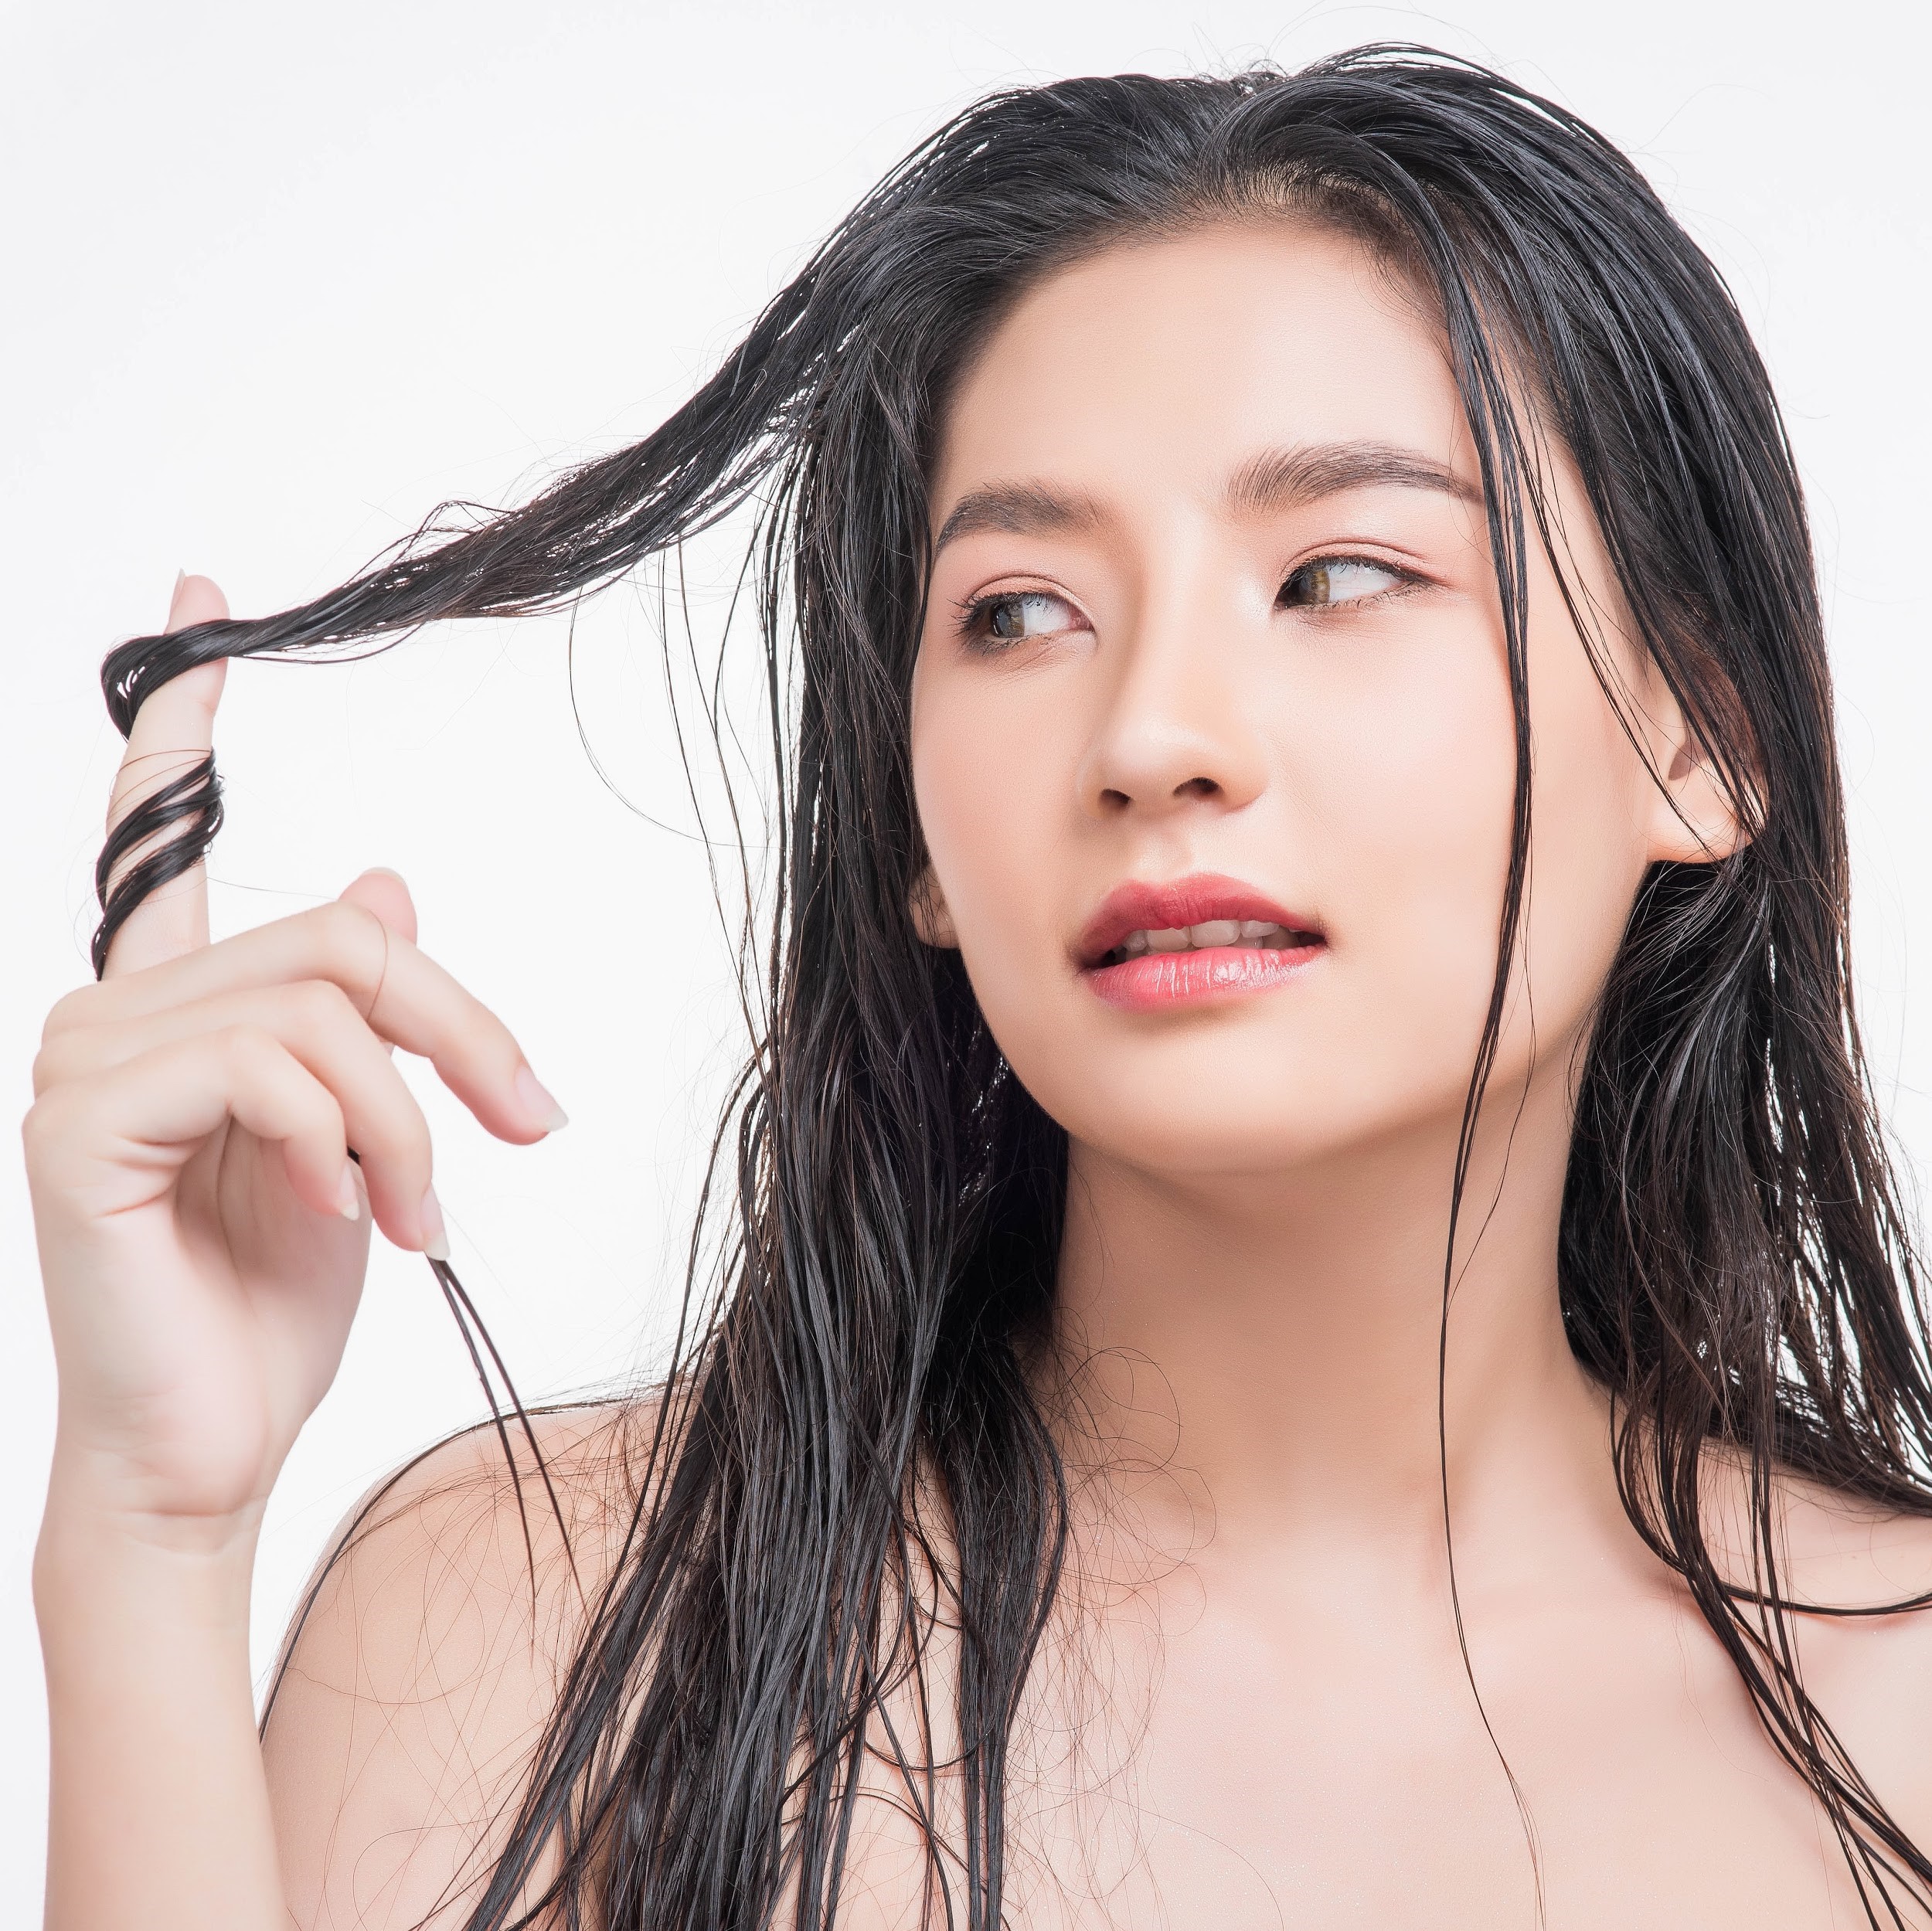 The 3 Big Things You Need to Know About Keratin Treatments